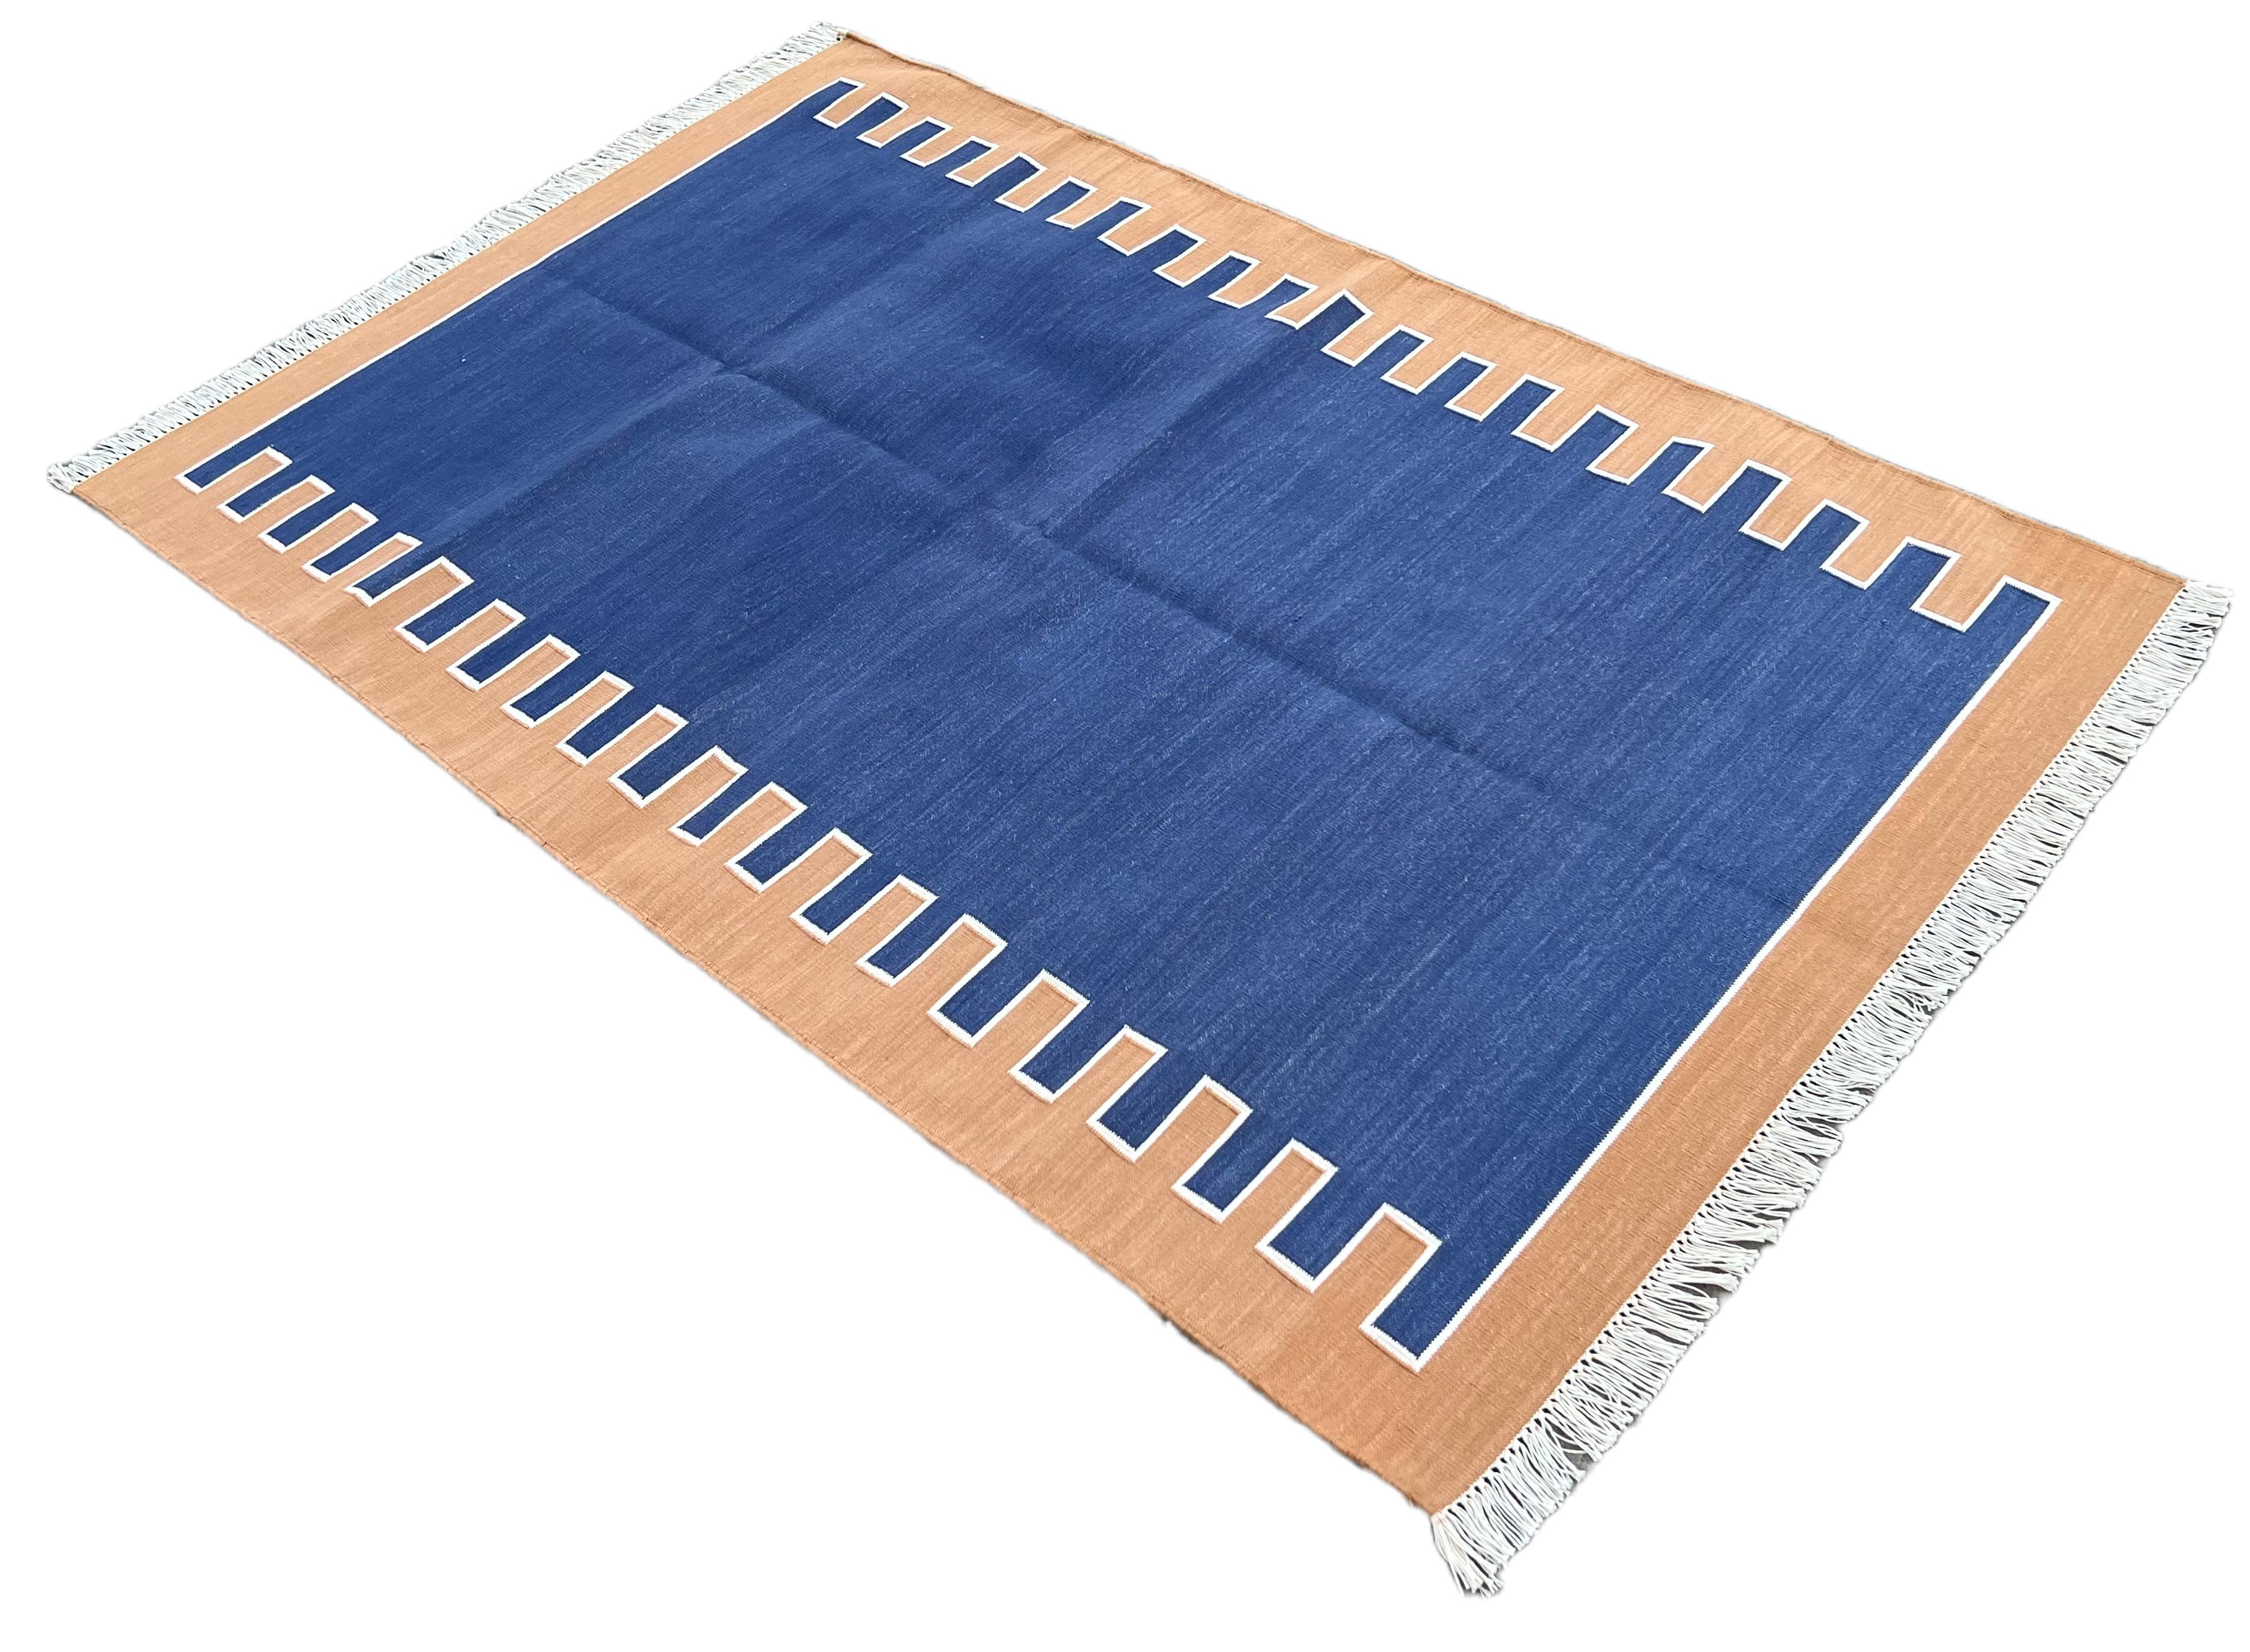 Cotton Natural Vegetable Dyed, Blue, Cream & Tan Zig Zag Striped Indian Rug - 3'x5'
These special flat-weave dhurries are hand-woven with 15 ply 100% cotton yarn. Due to the special manufacturing techniques used to create our rugs, the size and